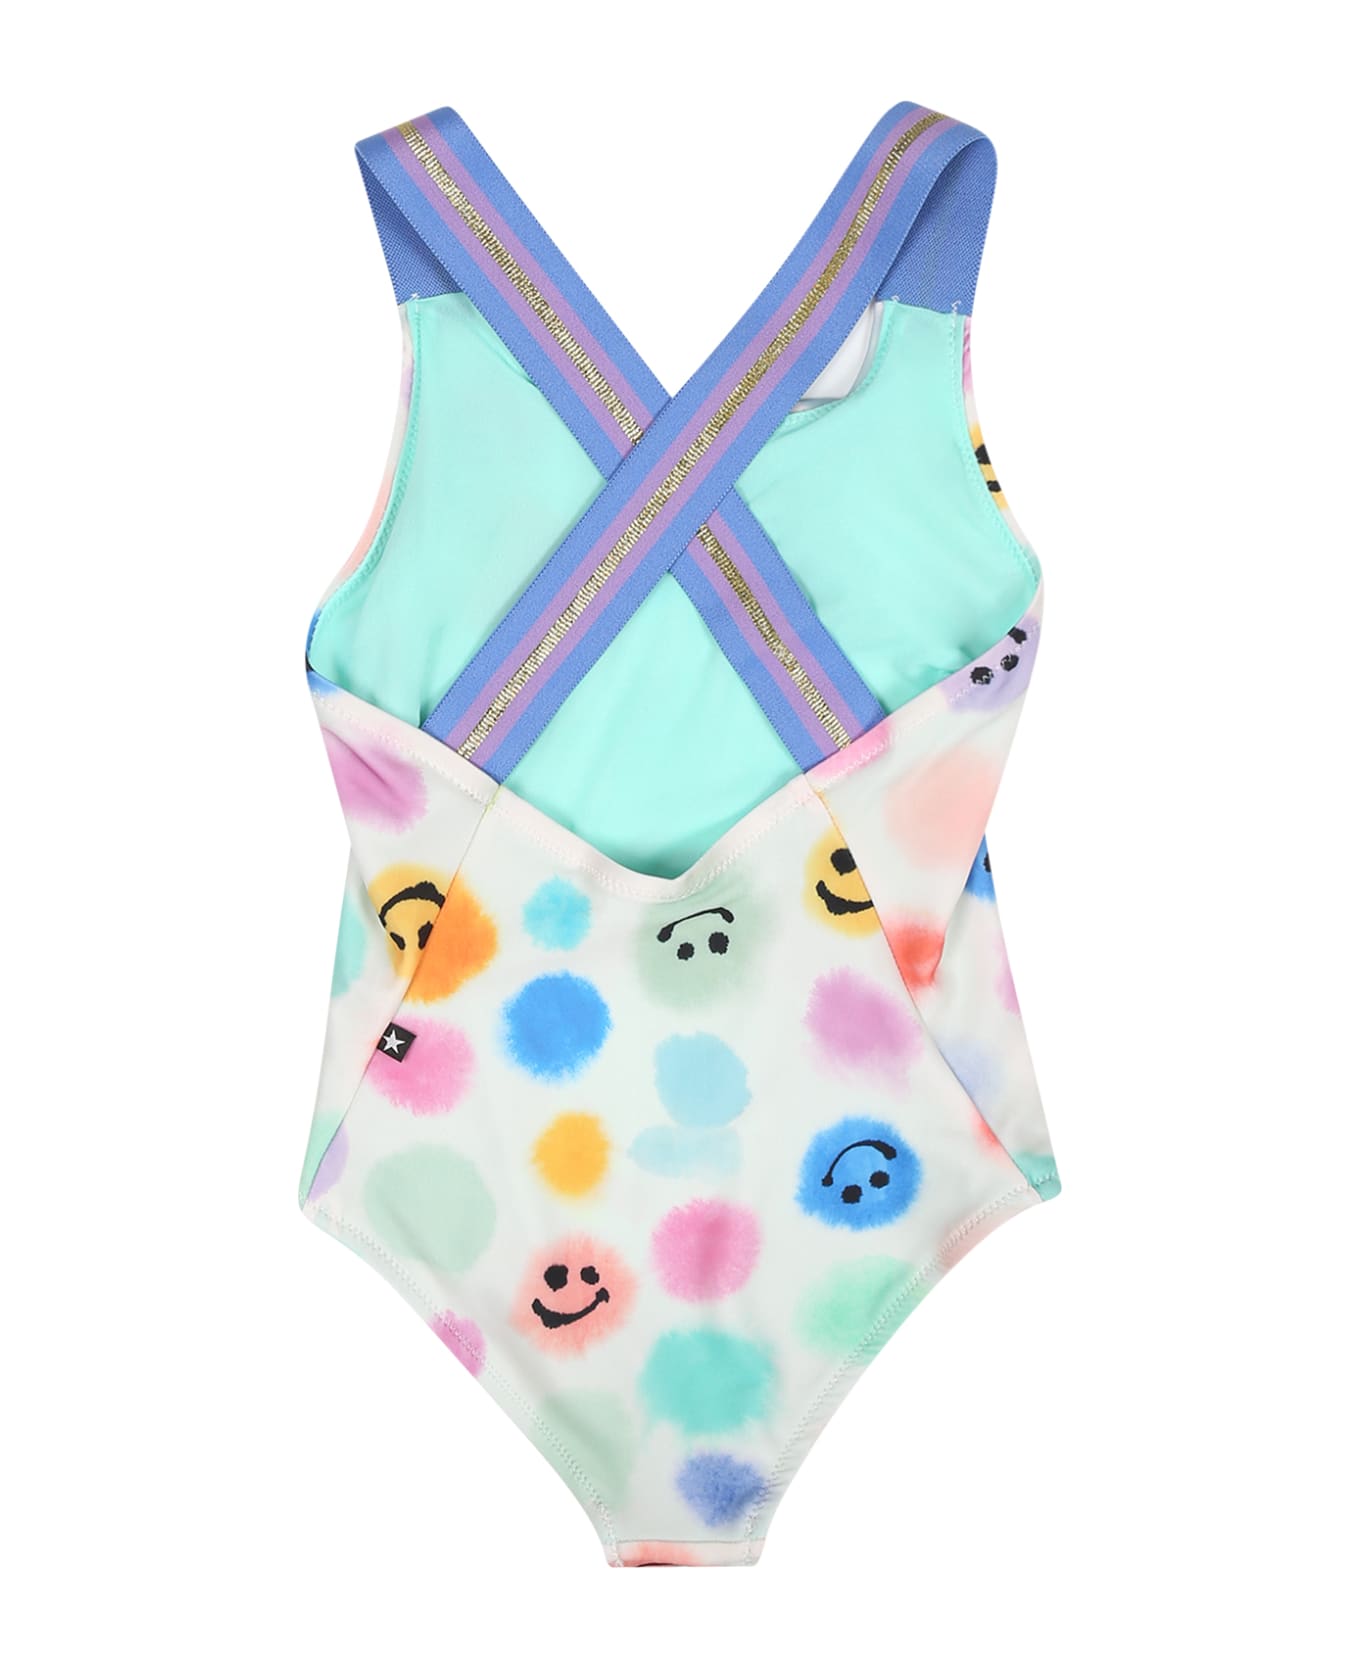 Molo White Swimsuit For Baby Girl With Polka Dots And Smiley - Multicolor 水着